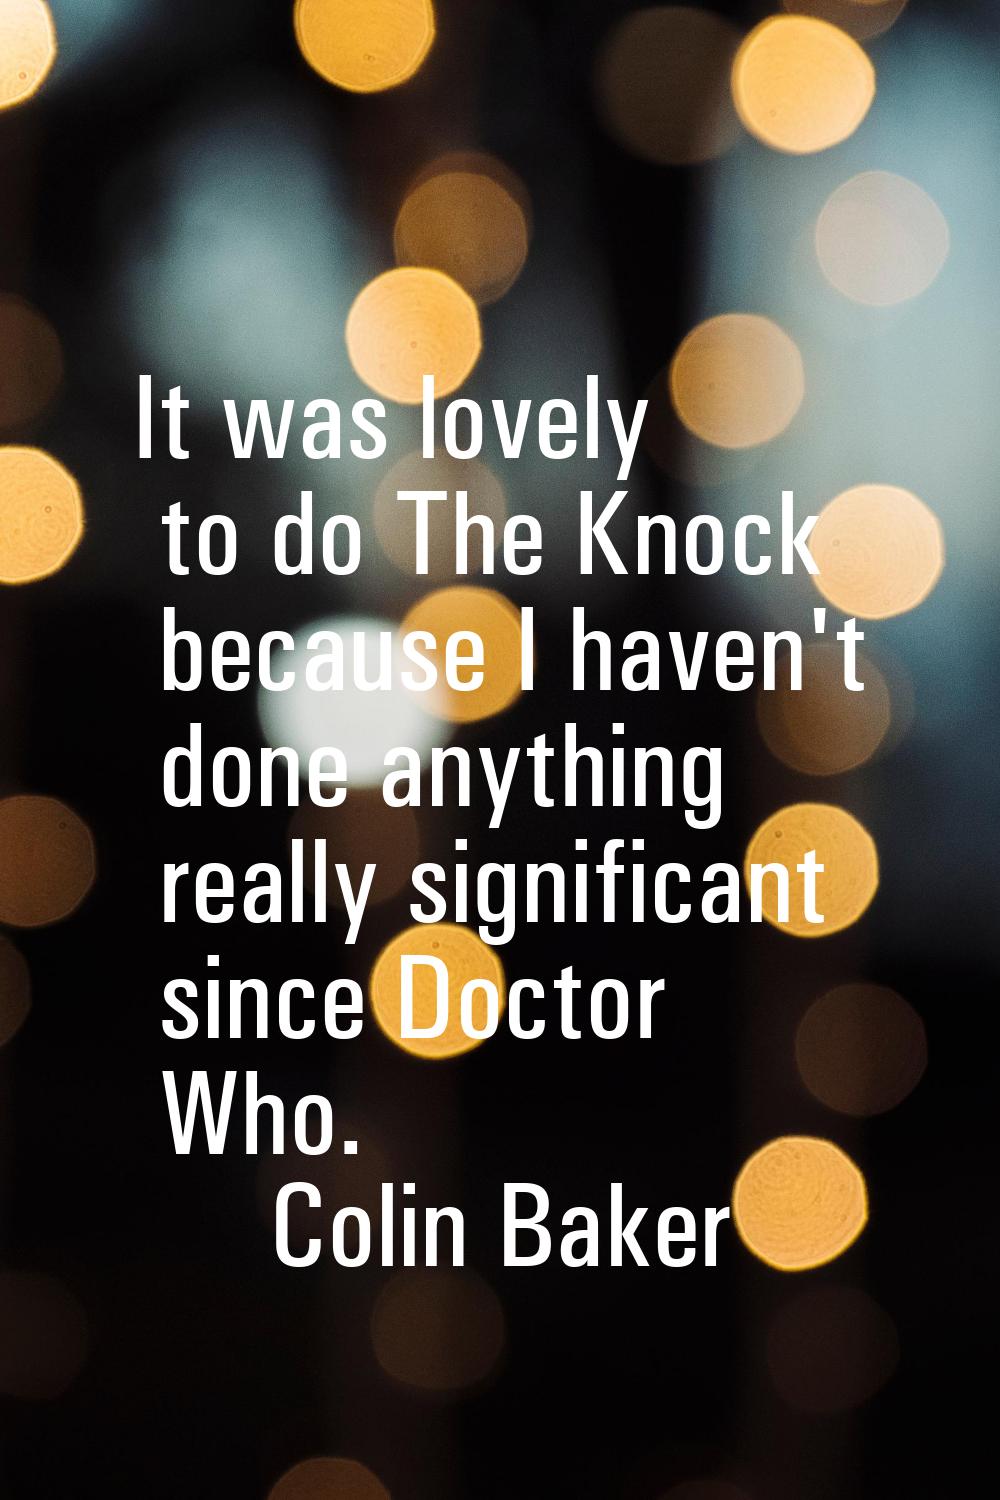 It was lovely to do The Knock because I haven't done anything really significant since Doctor Who.